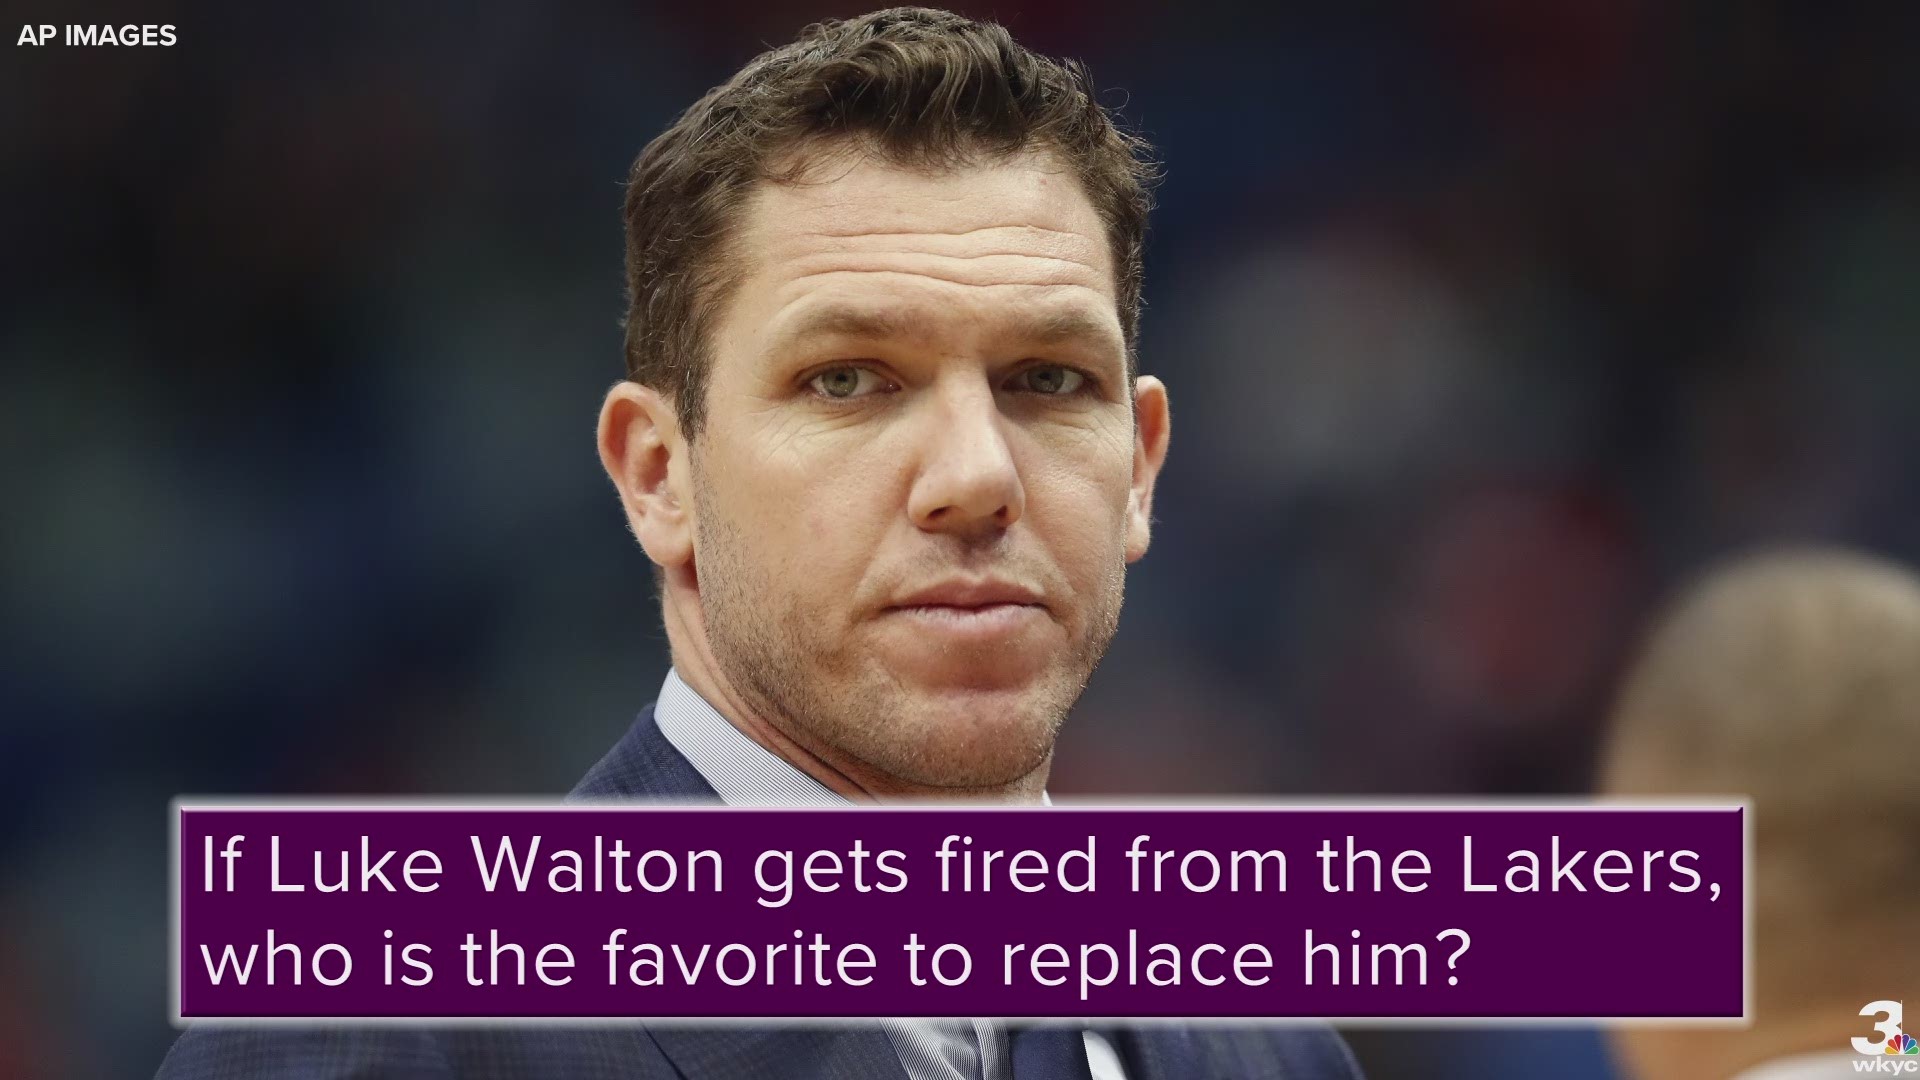 According to BetOnline, former Cleveland Cavaliers head coach Tyronn Lue is the favorite to replace Luke Walton as the head coach of the Los Angeles Lakers.